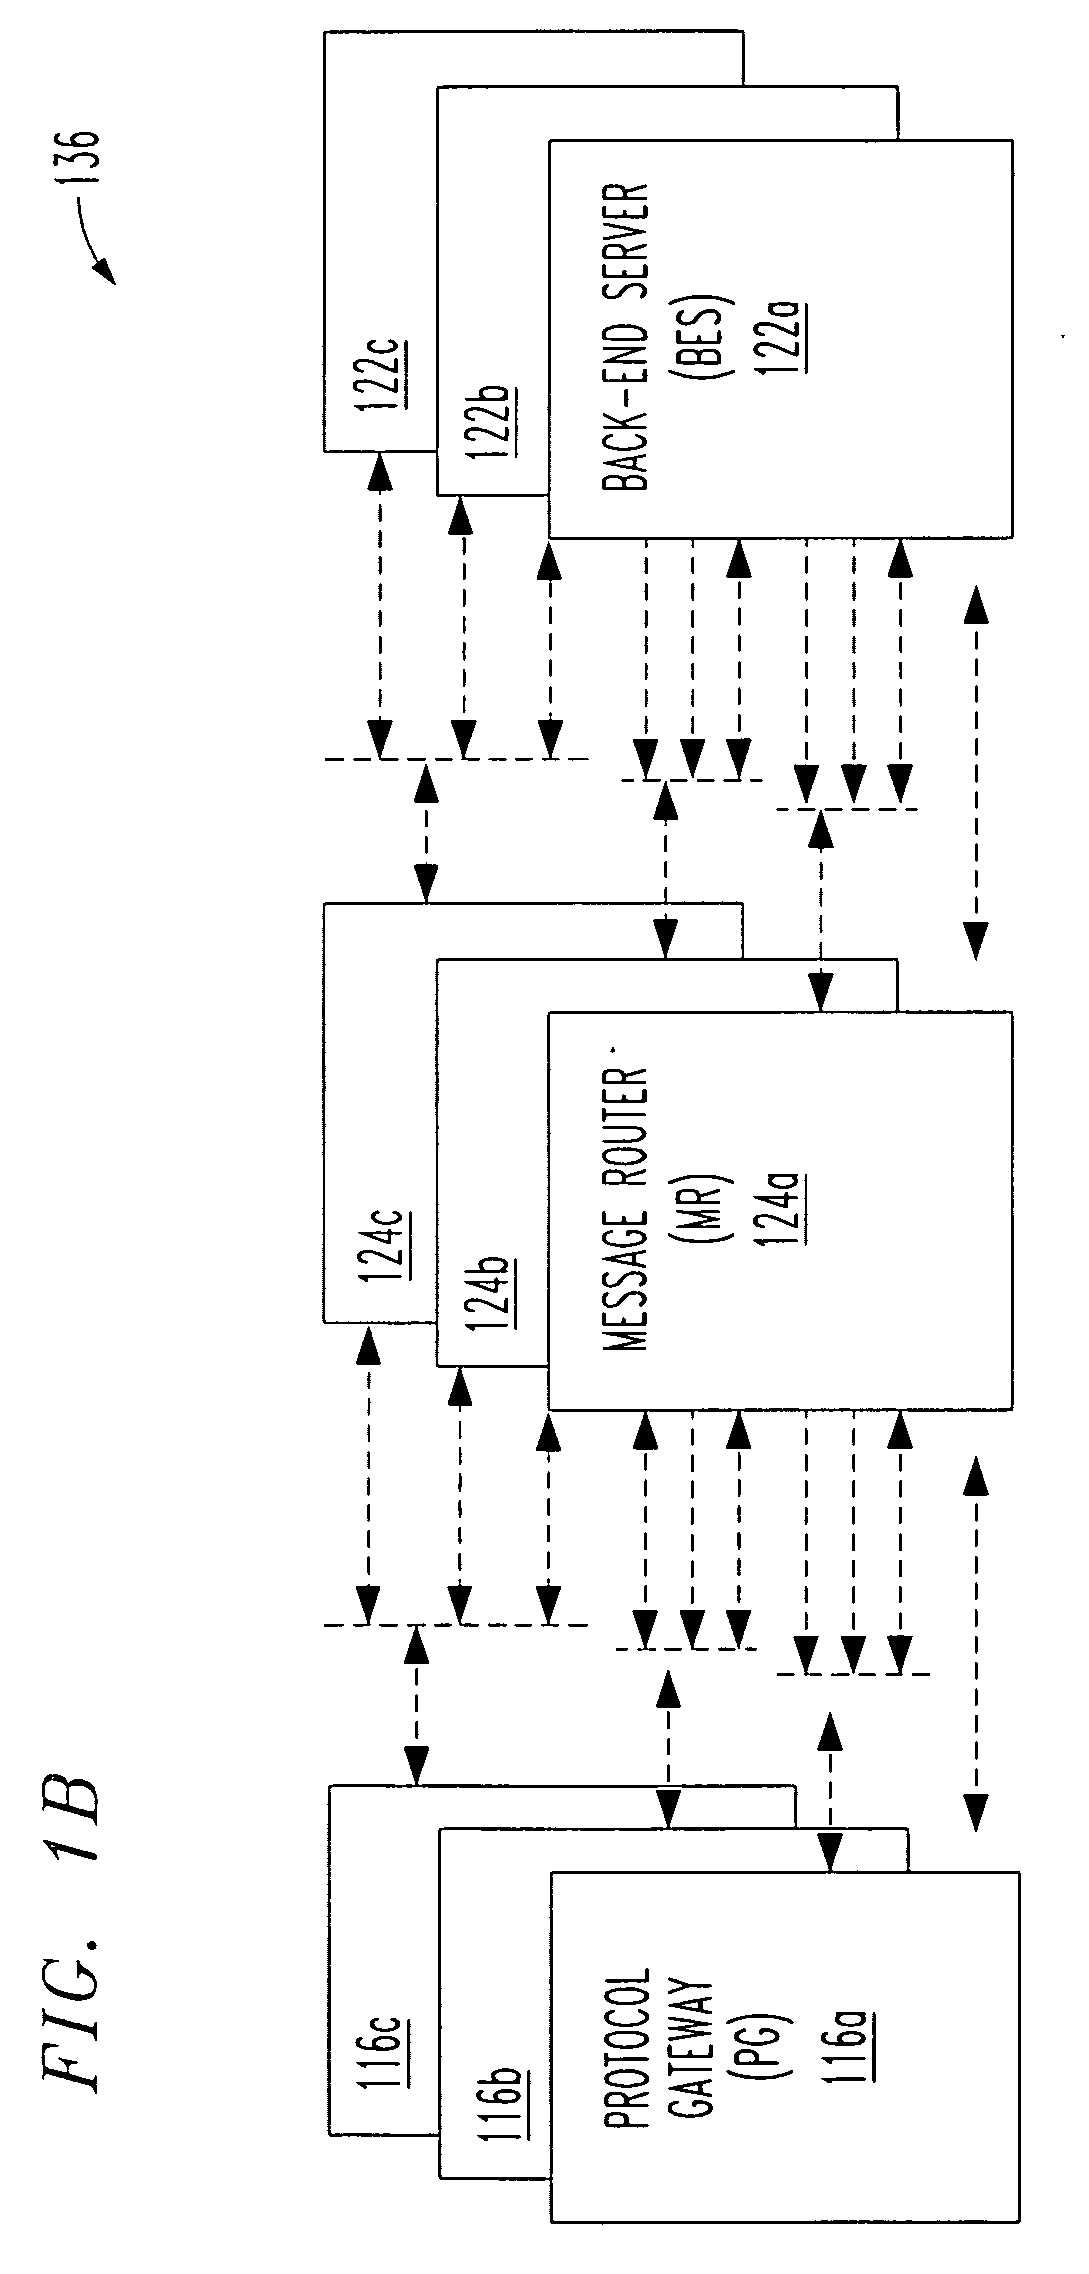 System and method for re-directing requests from browsers for communications over non-IP based networks